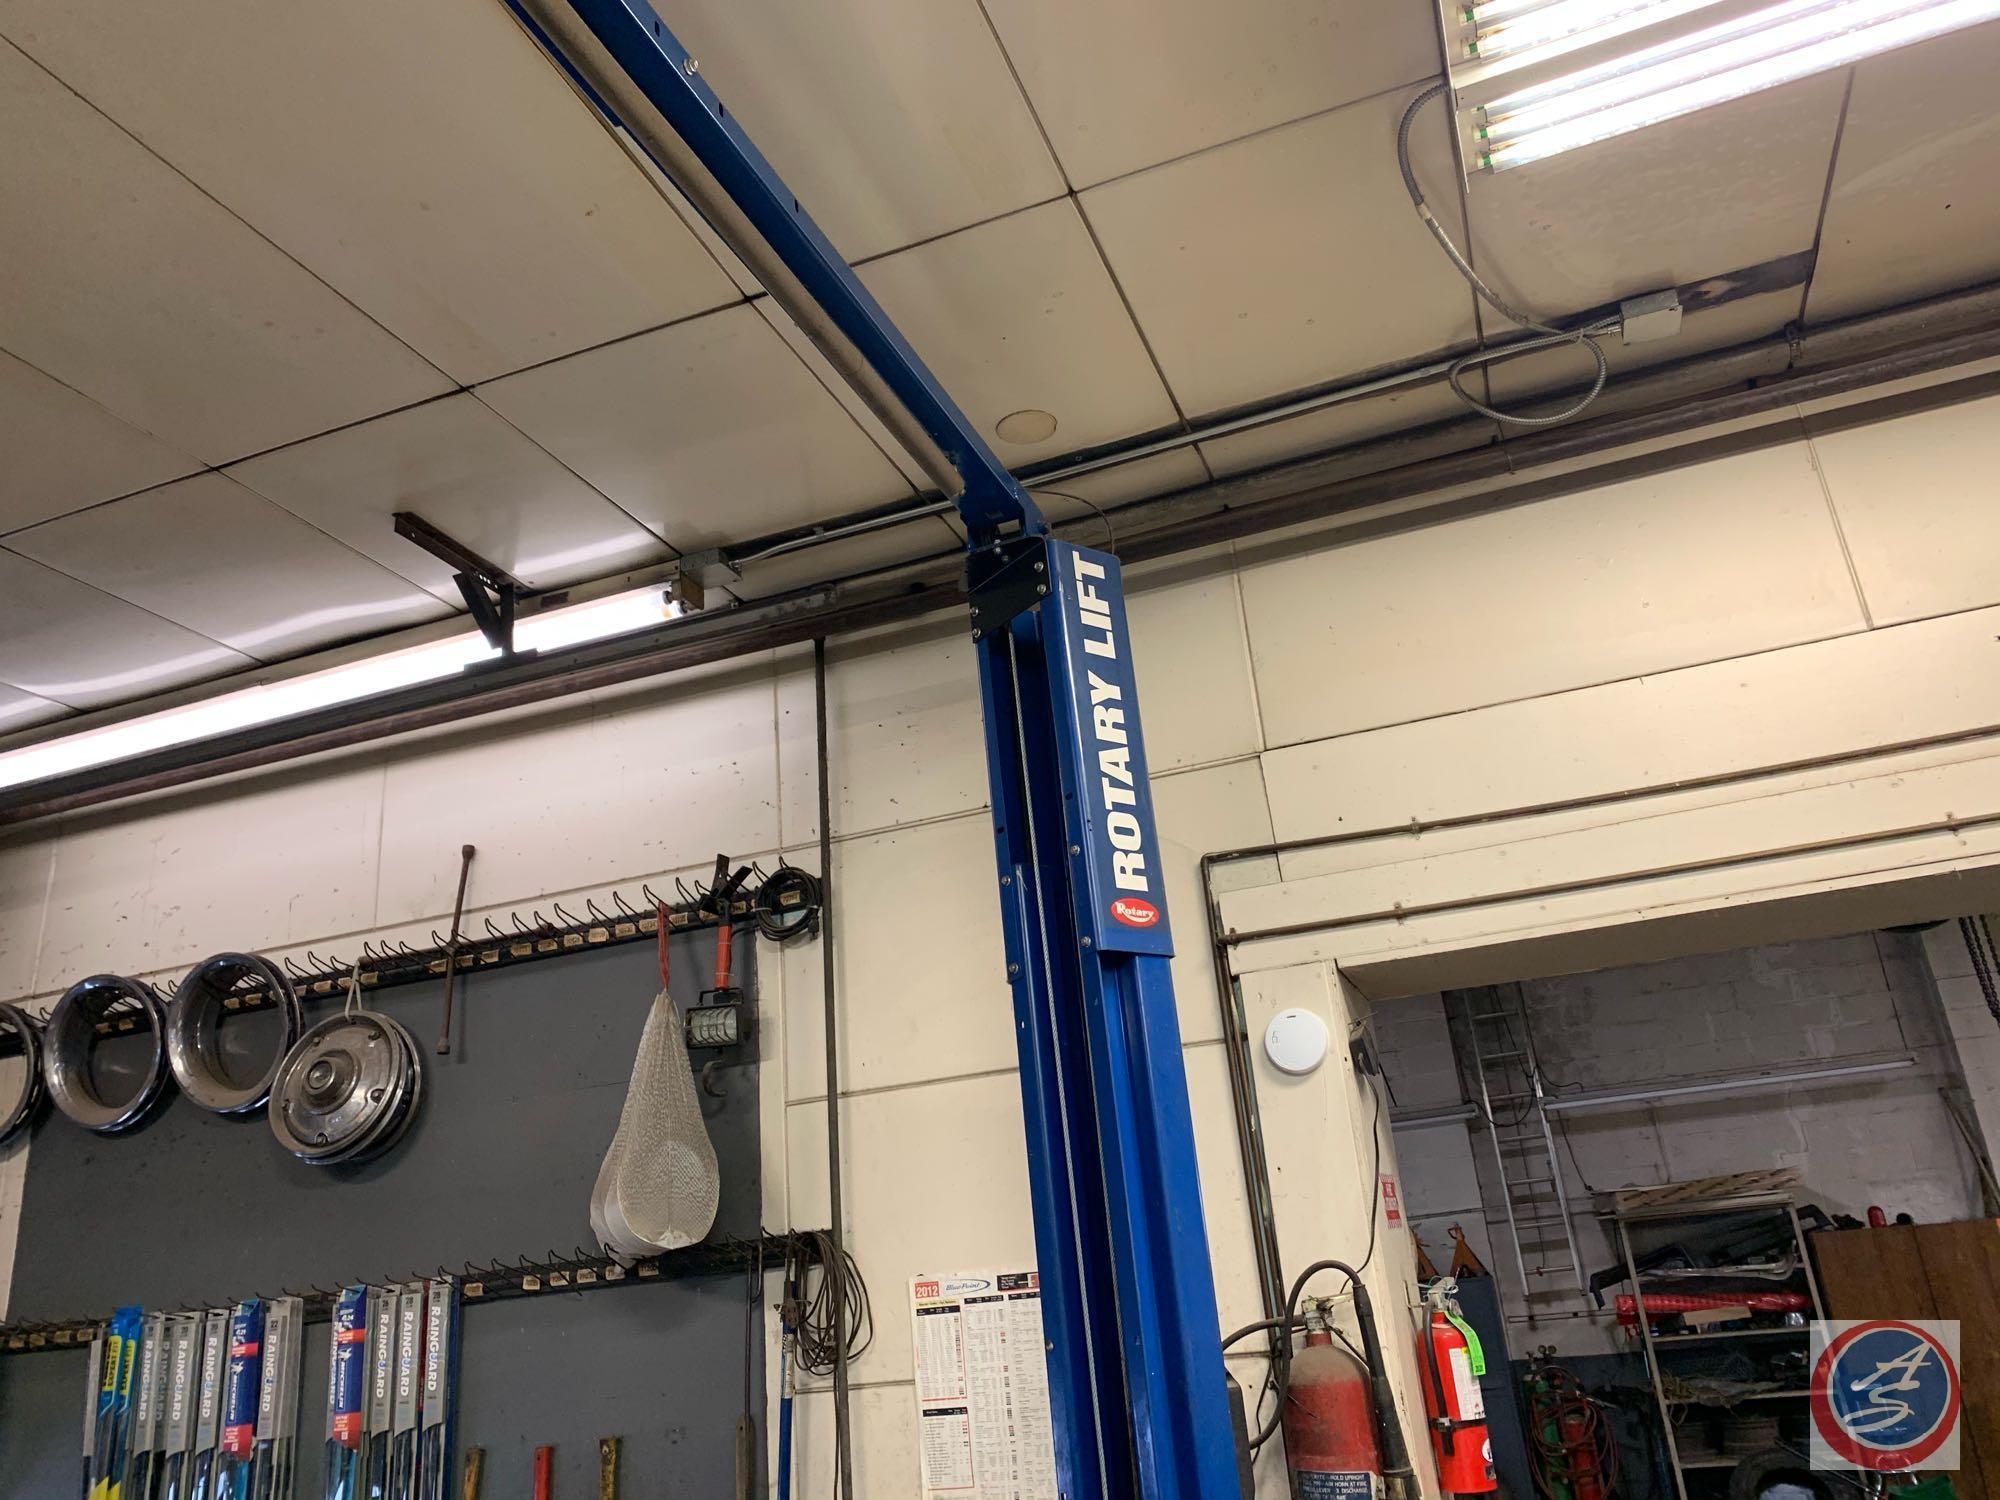 Rotary SPOA10N500 10,000lb 2 post hoist purchased new from Danielson Equipment. If you are a lift